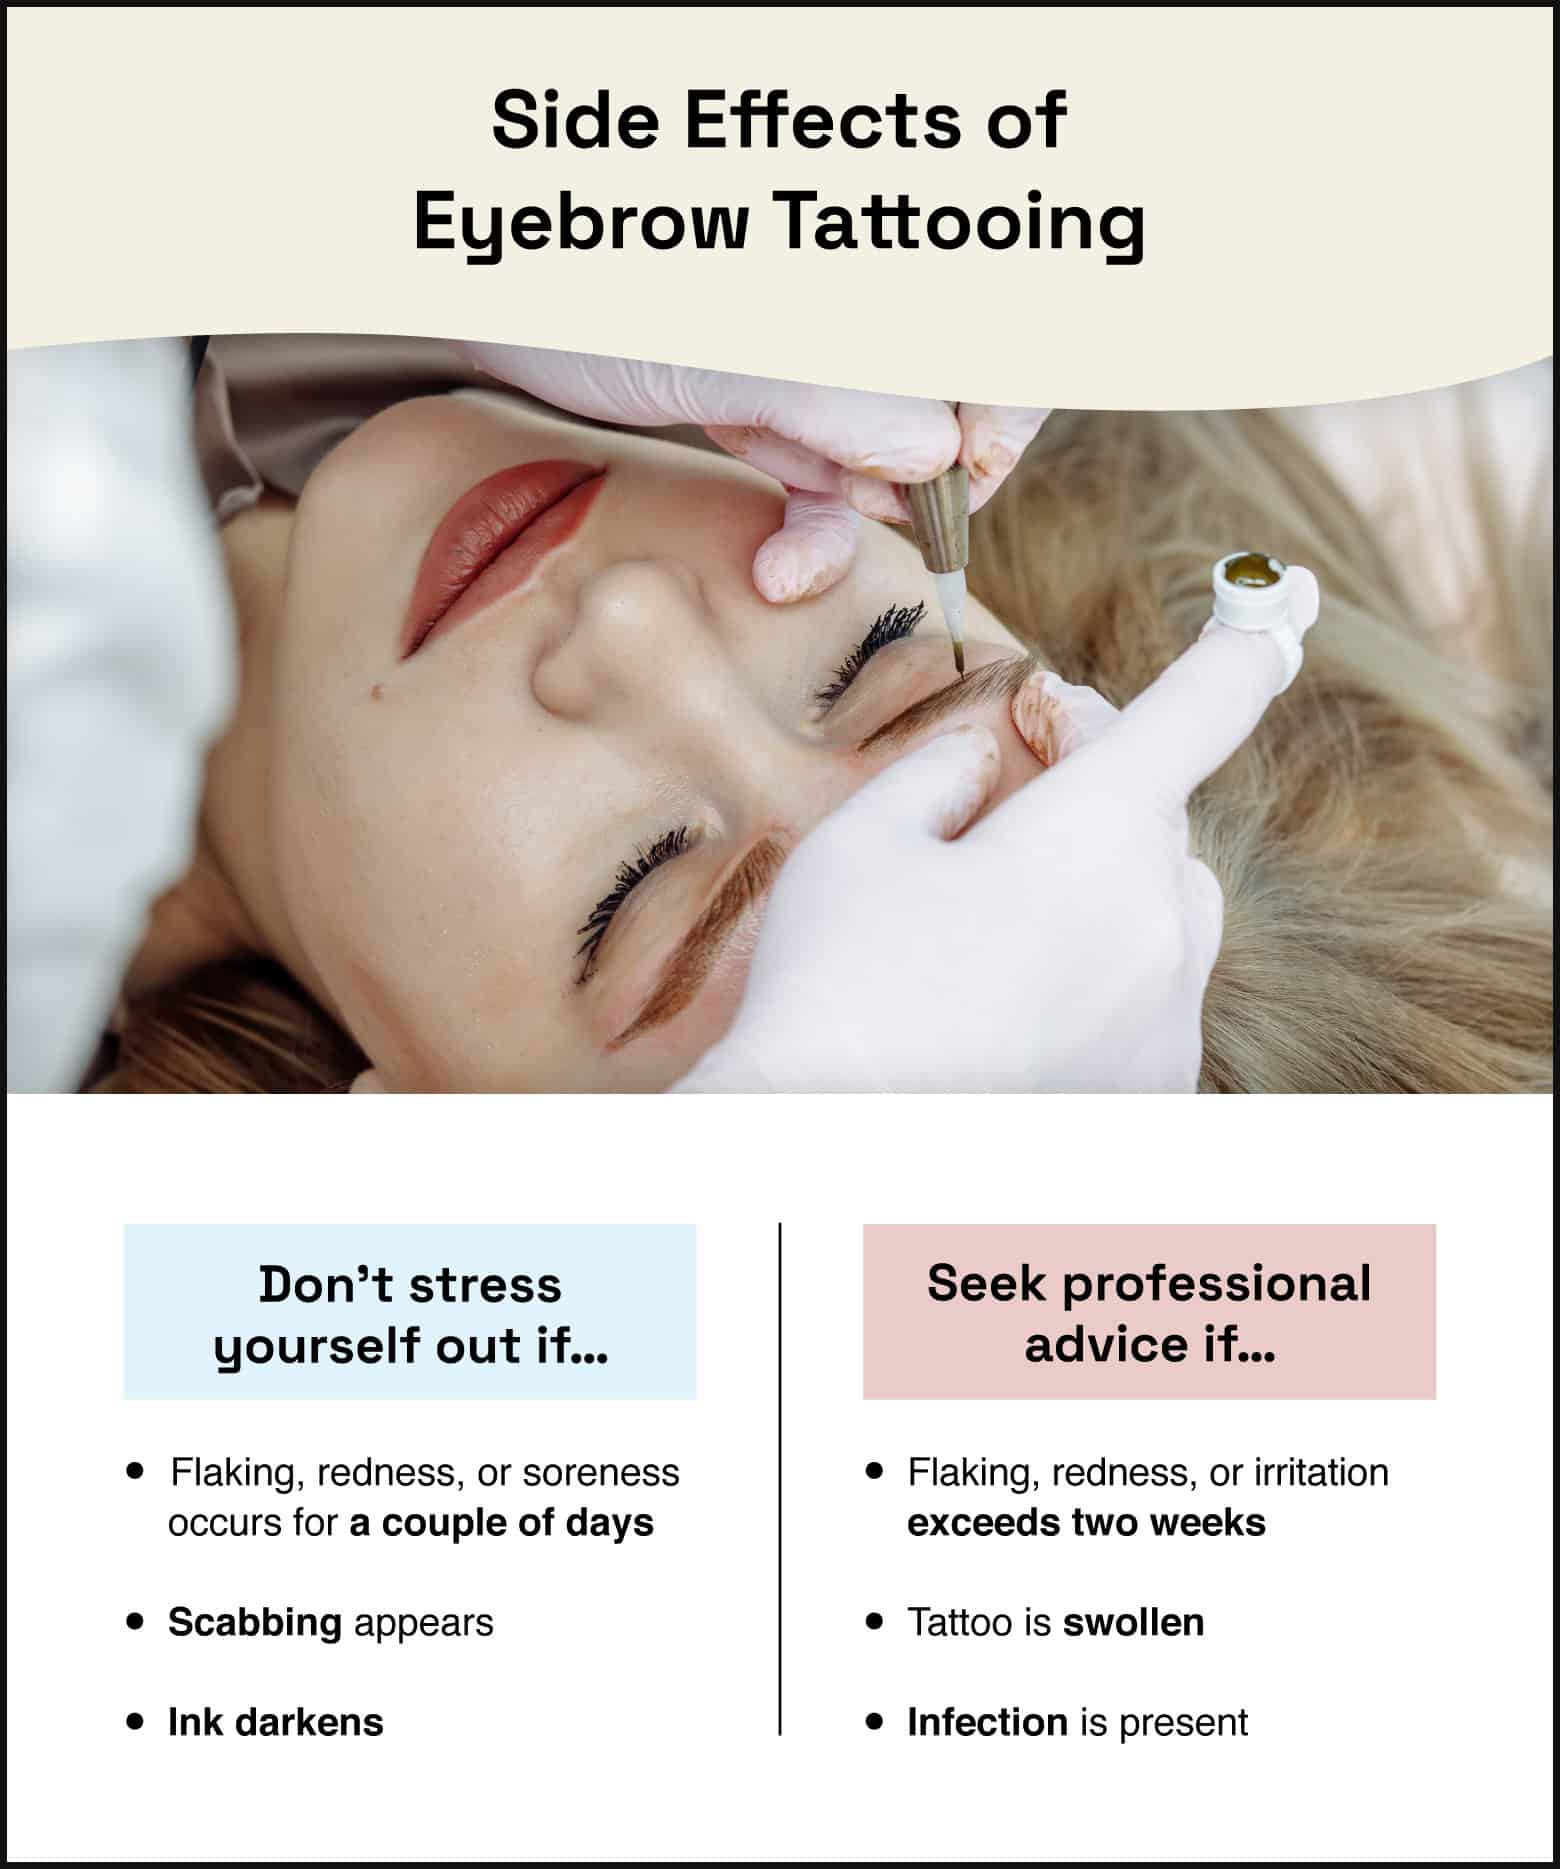 A photo of a blonde woman getting her eyebrows tattooed is paired with two columns of normal side effects and alarming side effects.